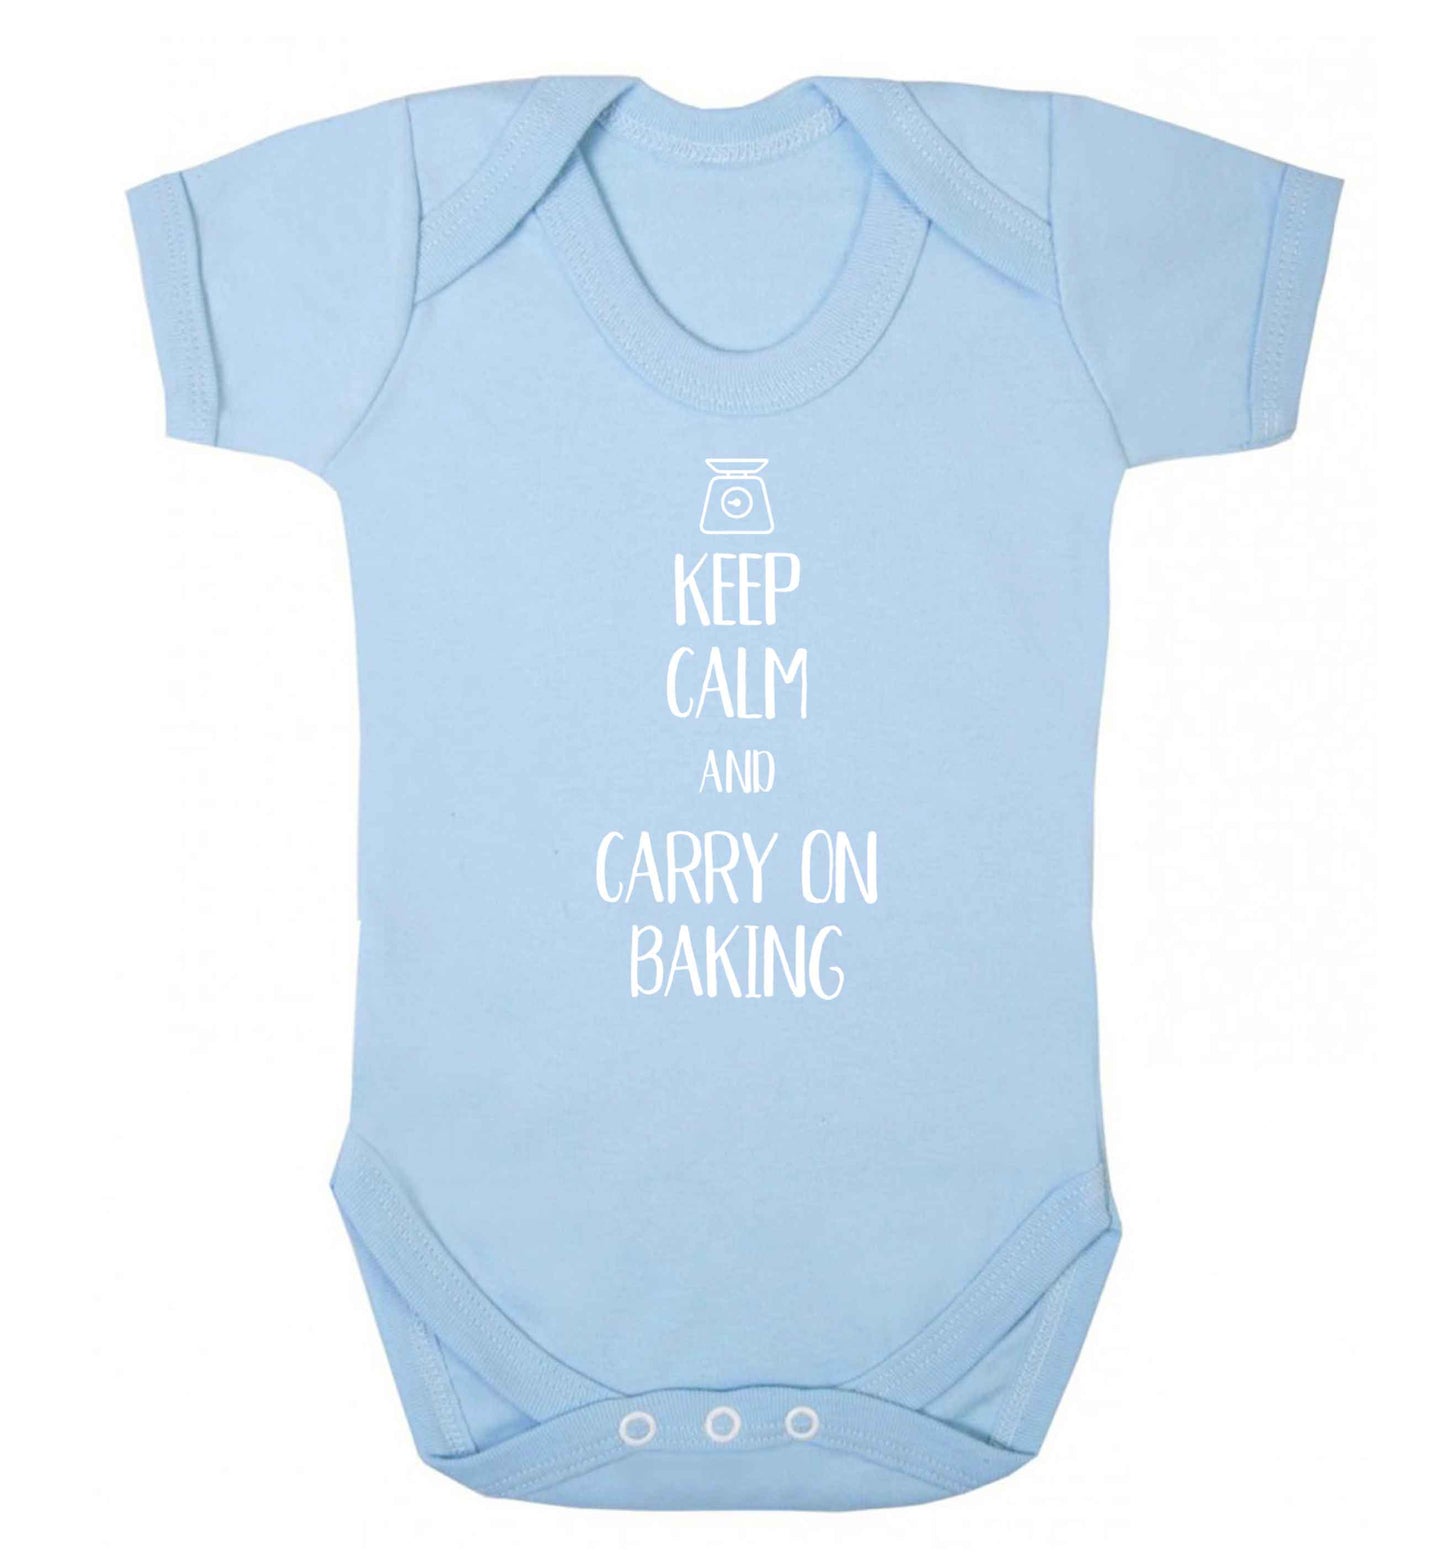 Keep calm and carry on baking Baby Vest pale blue 18-24 months